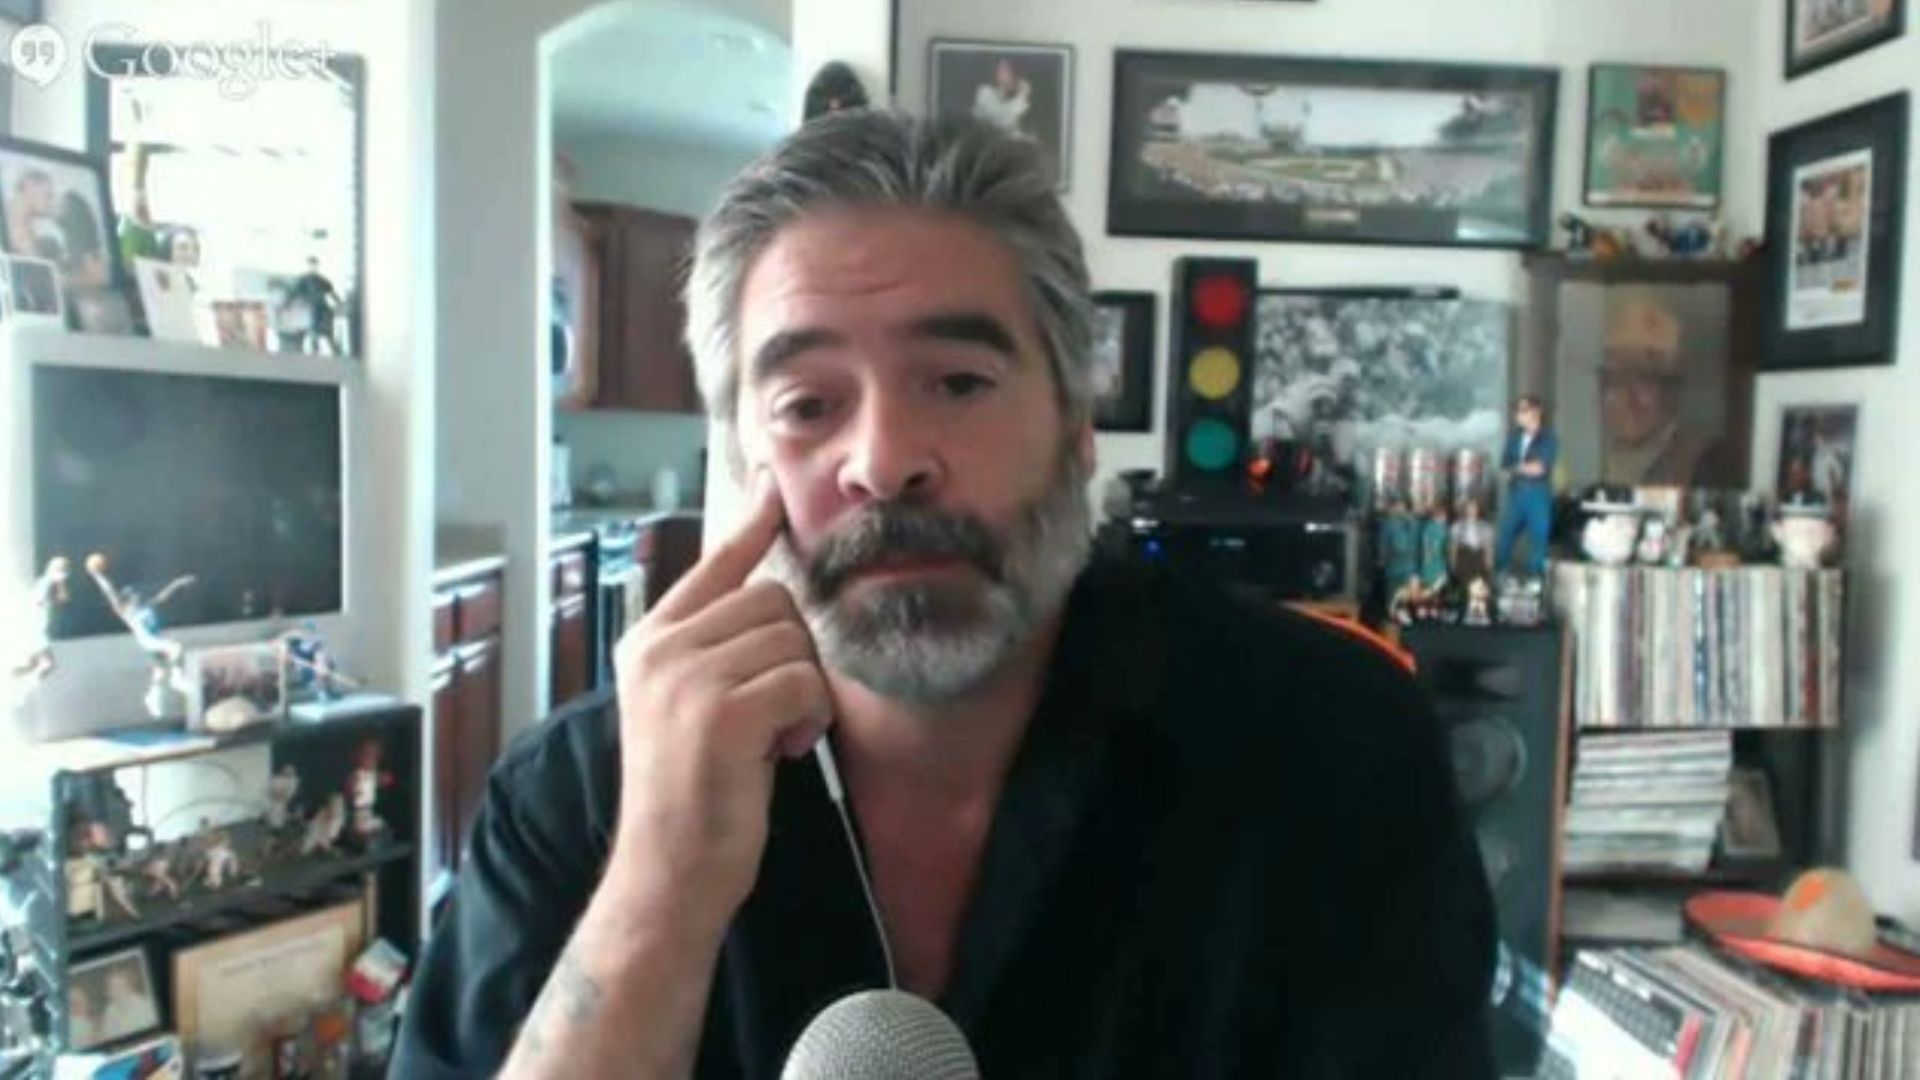 Vince Russo had some interesting thoughts to share this week